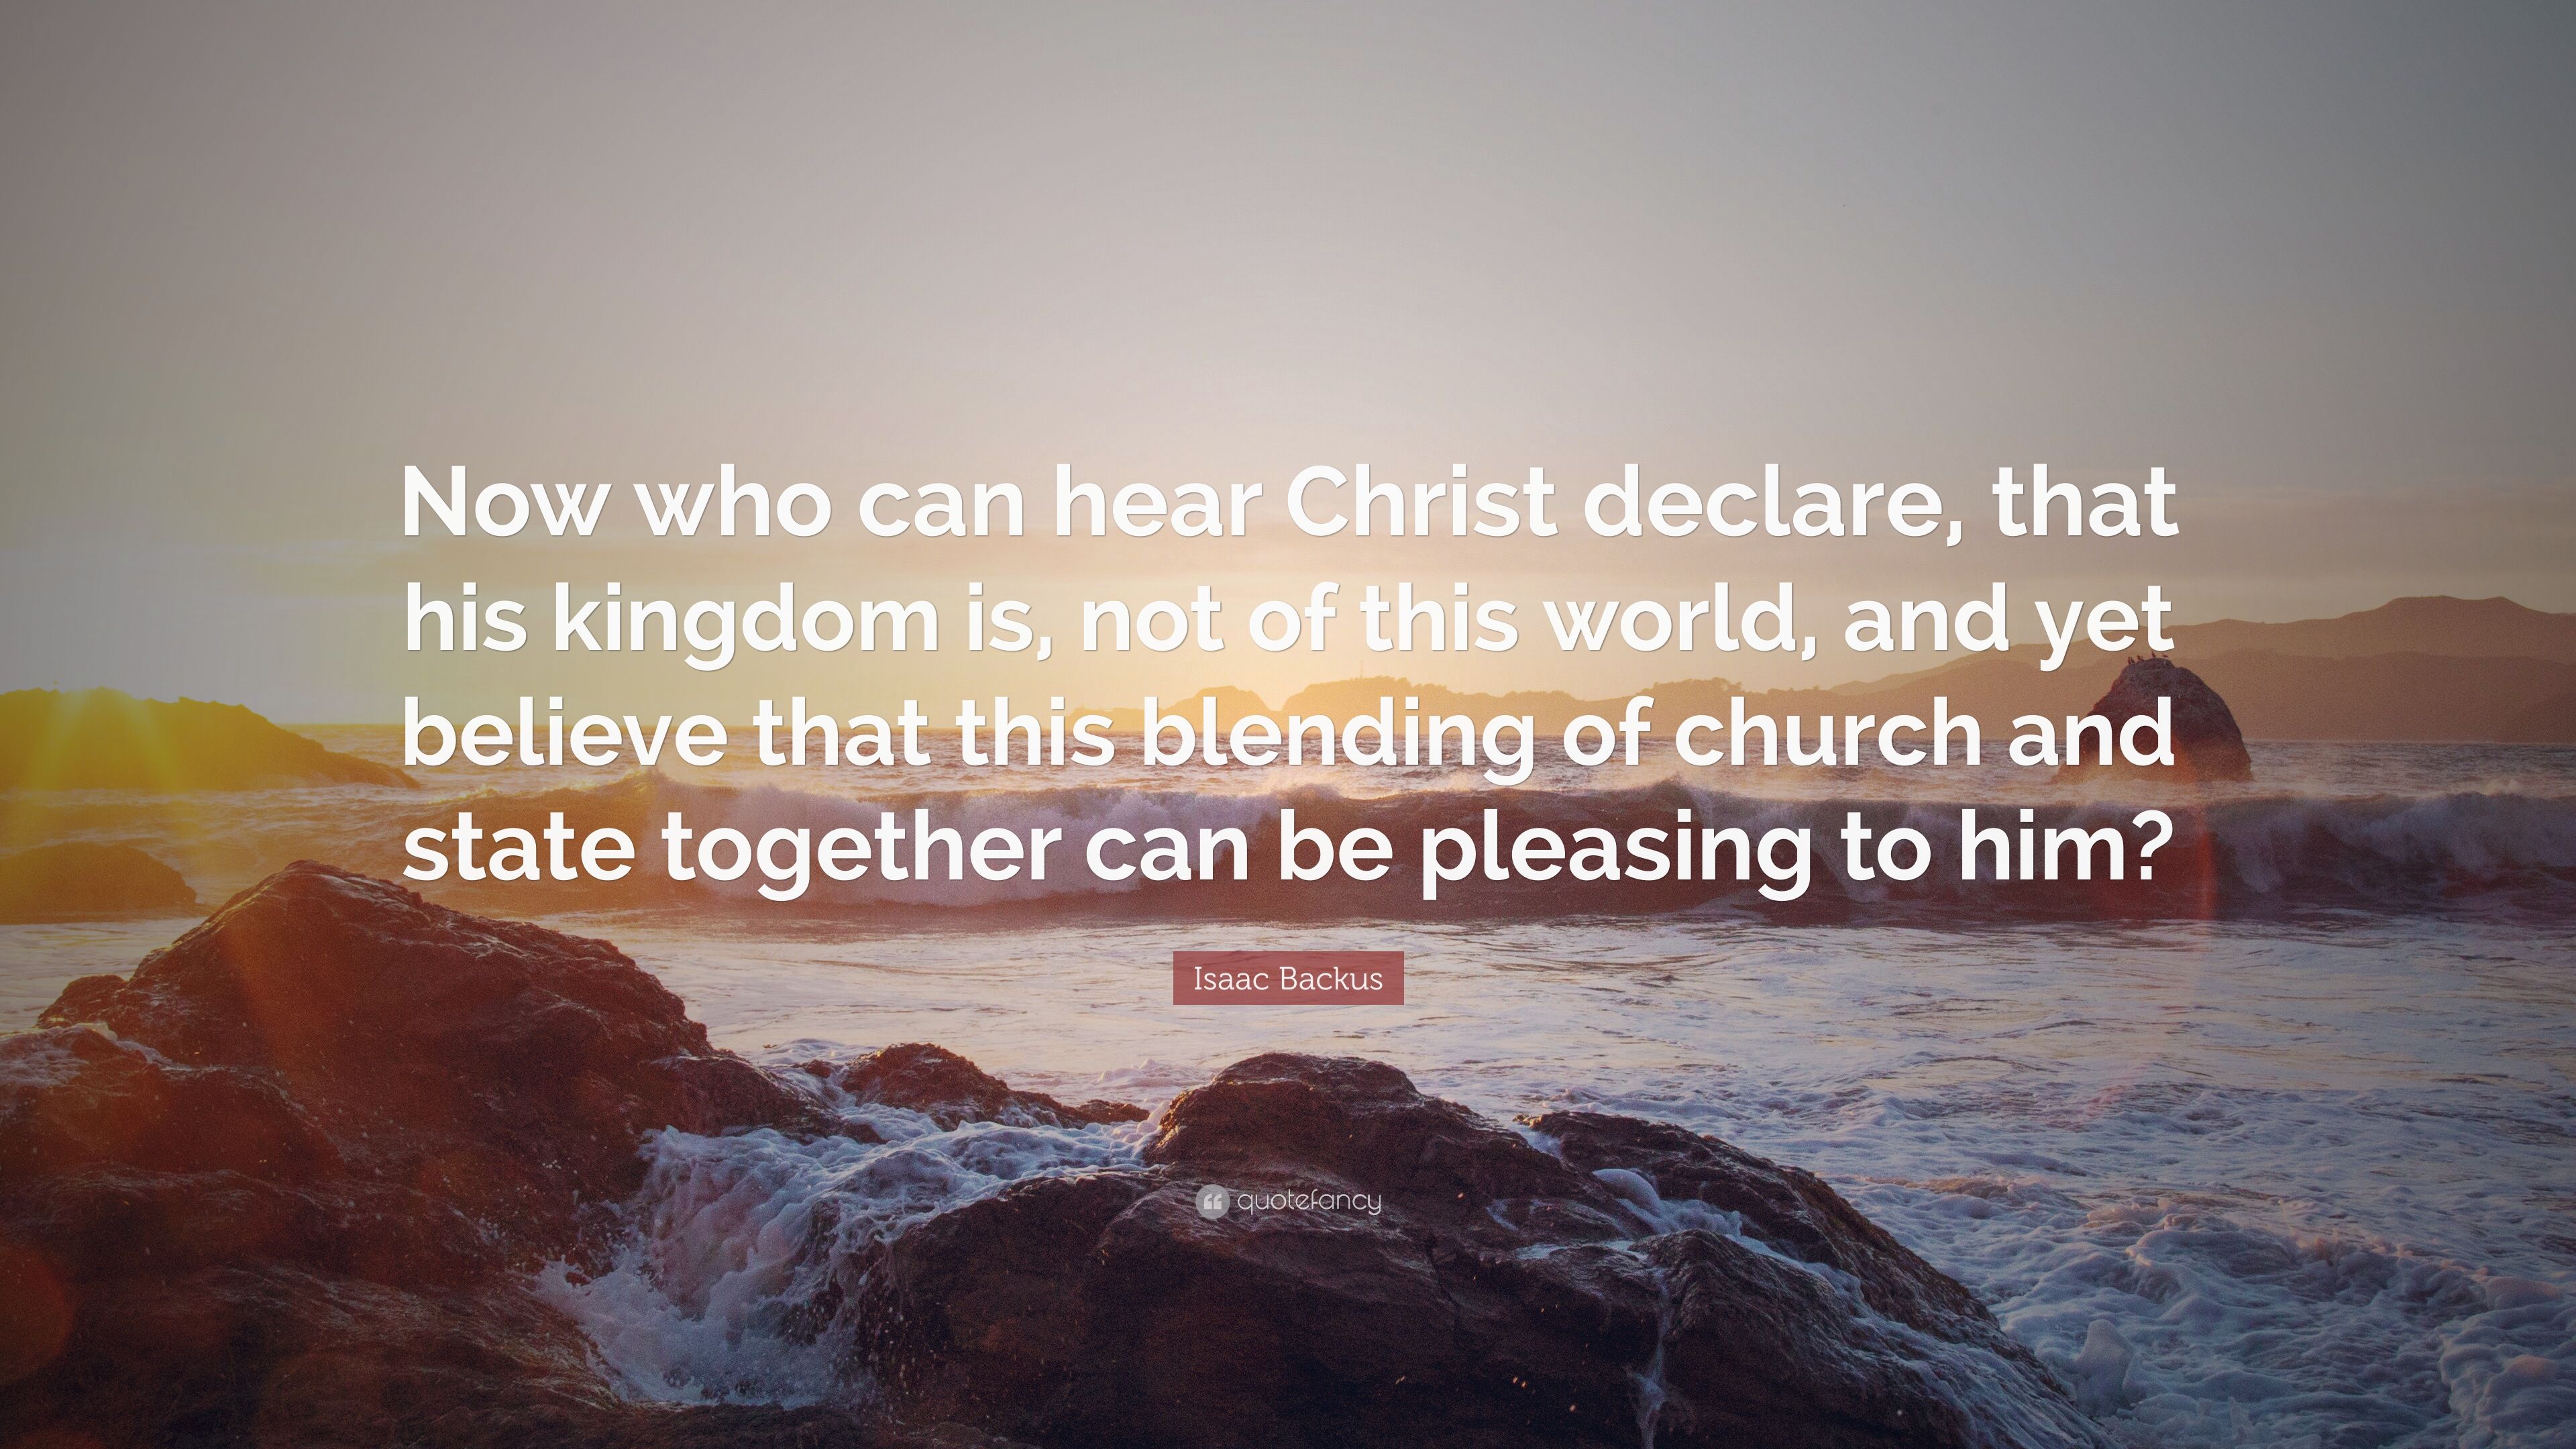 Isaac Backus Quote: “Now who can hear Christ declare, that his ...